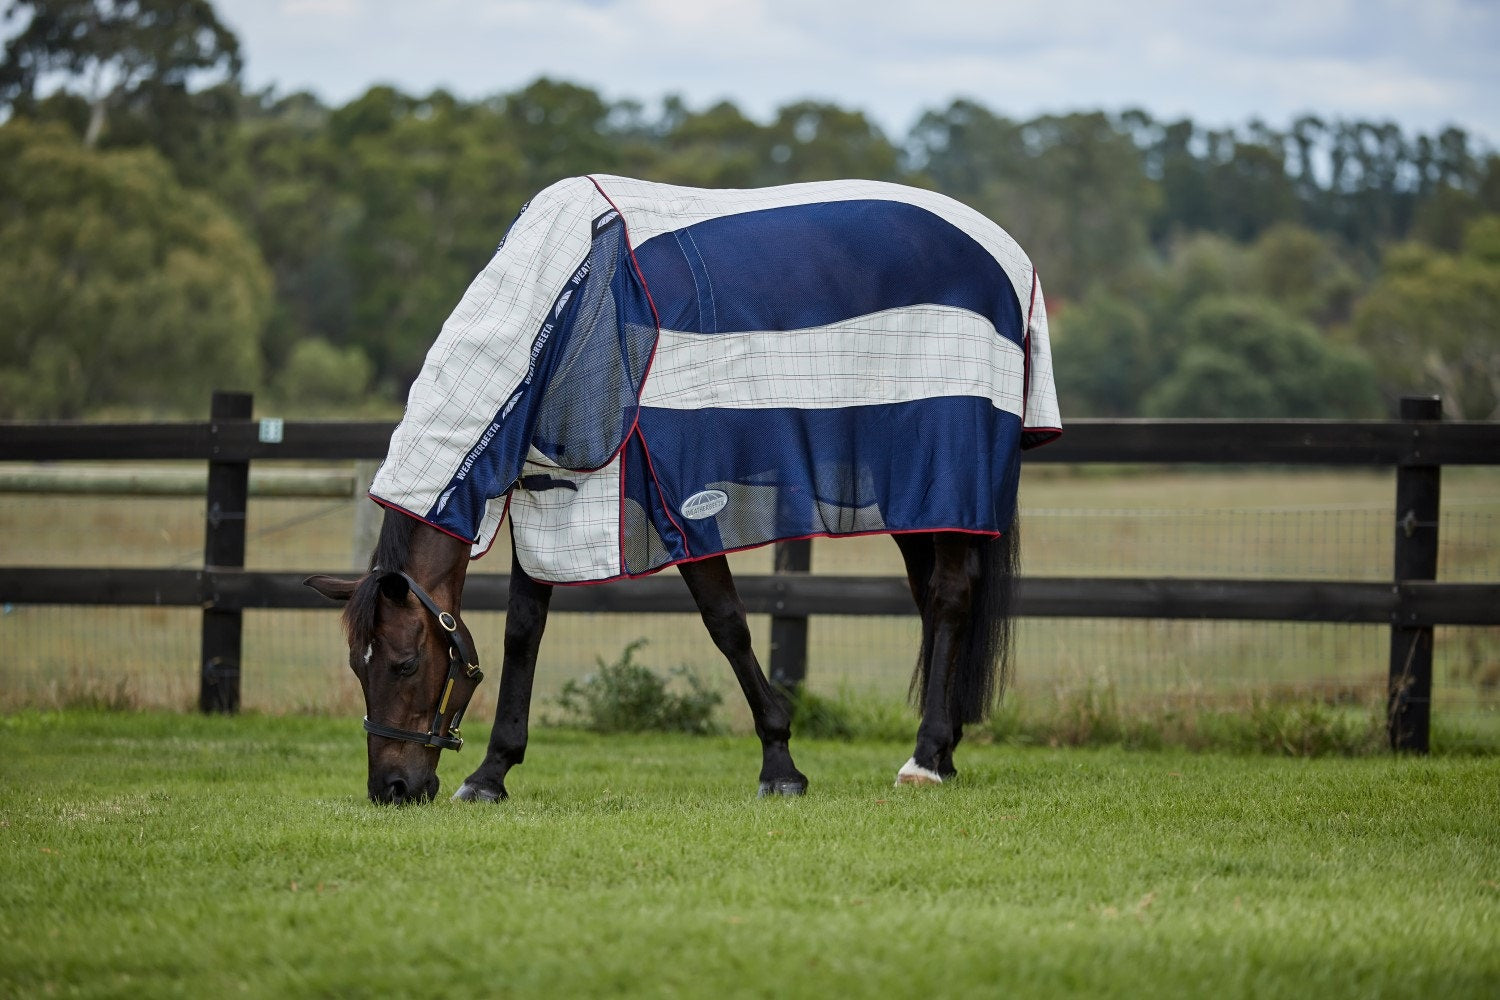 Beat the Buzz This Summer: Top 5 Reasons Why Your Horse Needs a Fly Sheet & Fly Mask